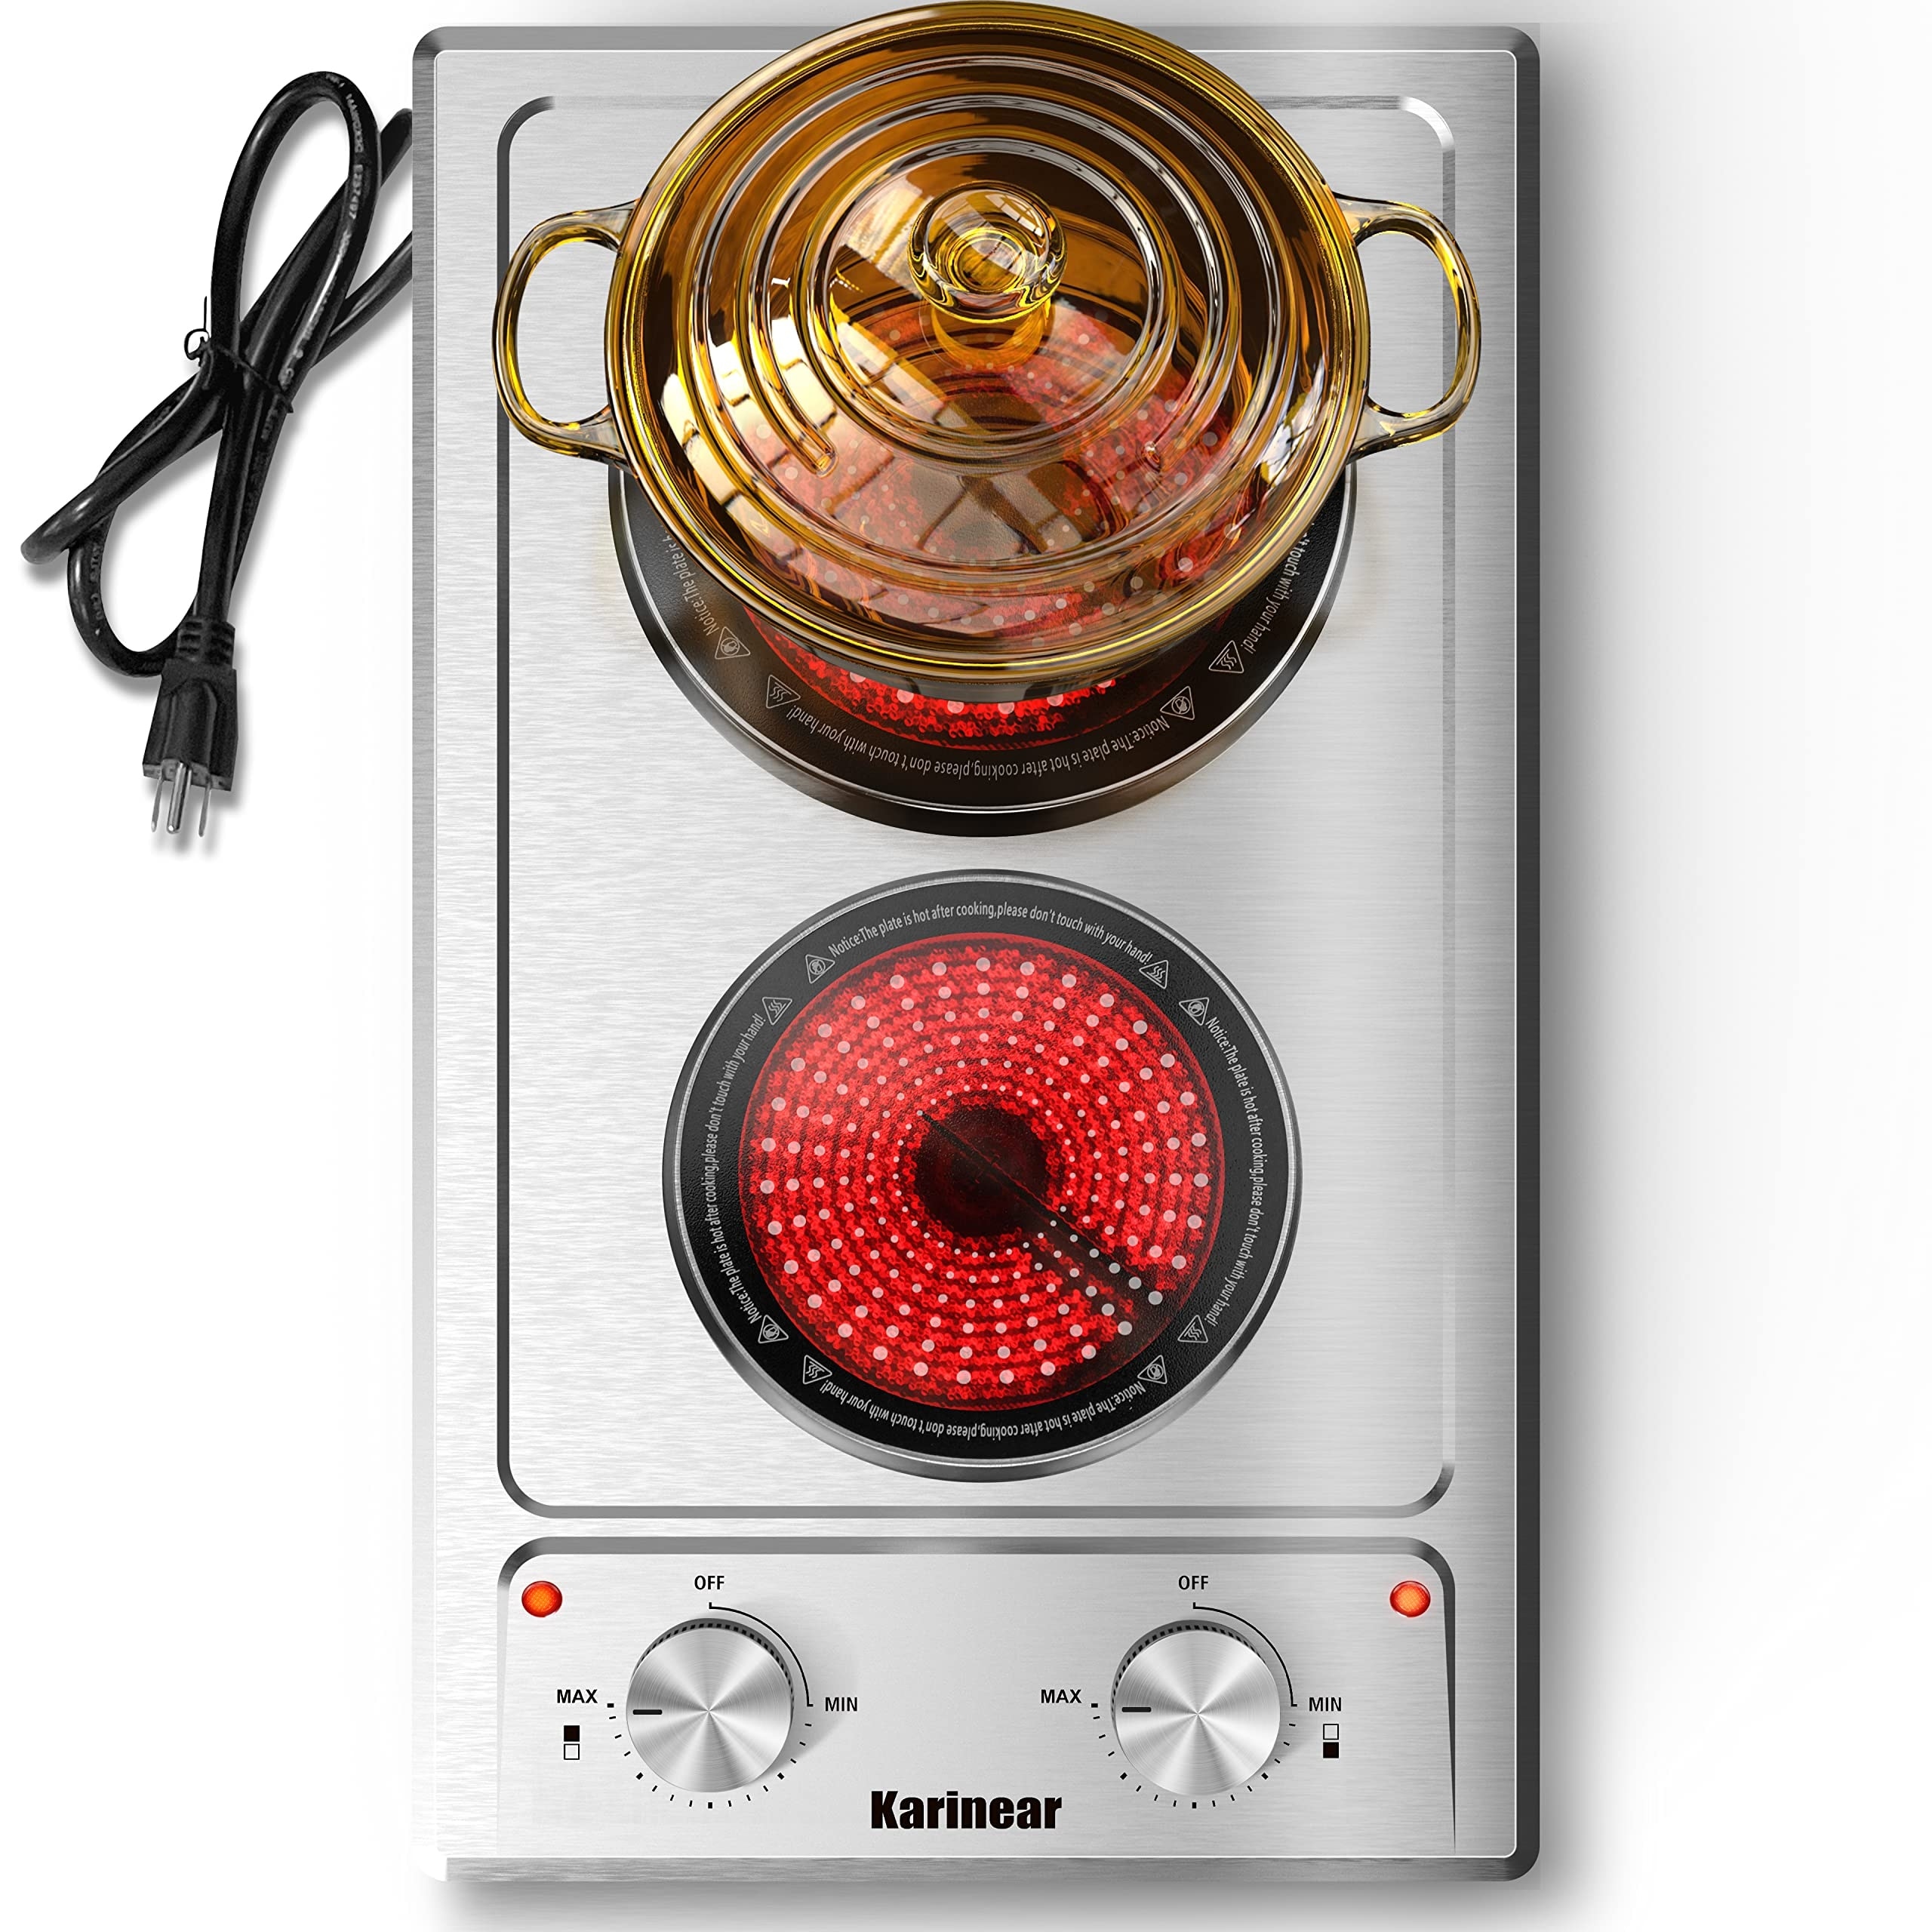 https://ak1.ostkcdn.com/images/products/is/images/direct/2604cffff383470a8c99af2f95b4e001415ec88d/Electric-Cooktop-110V%2C-12%22Stainless-Steel-Built-in-and-Countertop-Electric-Stove-top-2-Burners-with-Knob-Control-16-Power-Levels.jpg